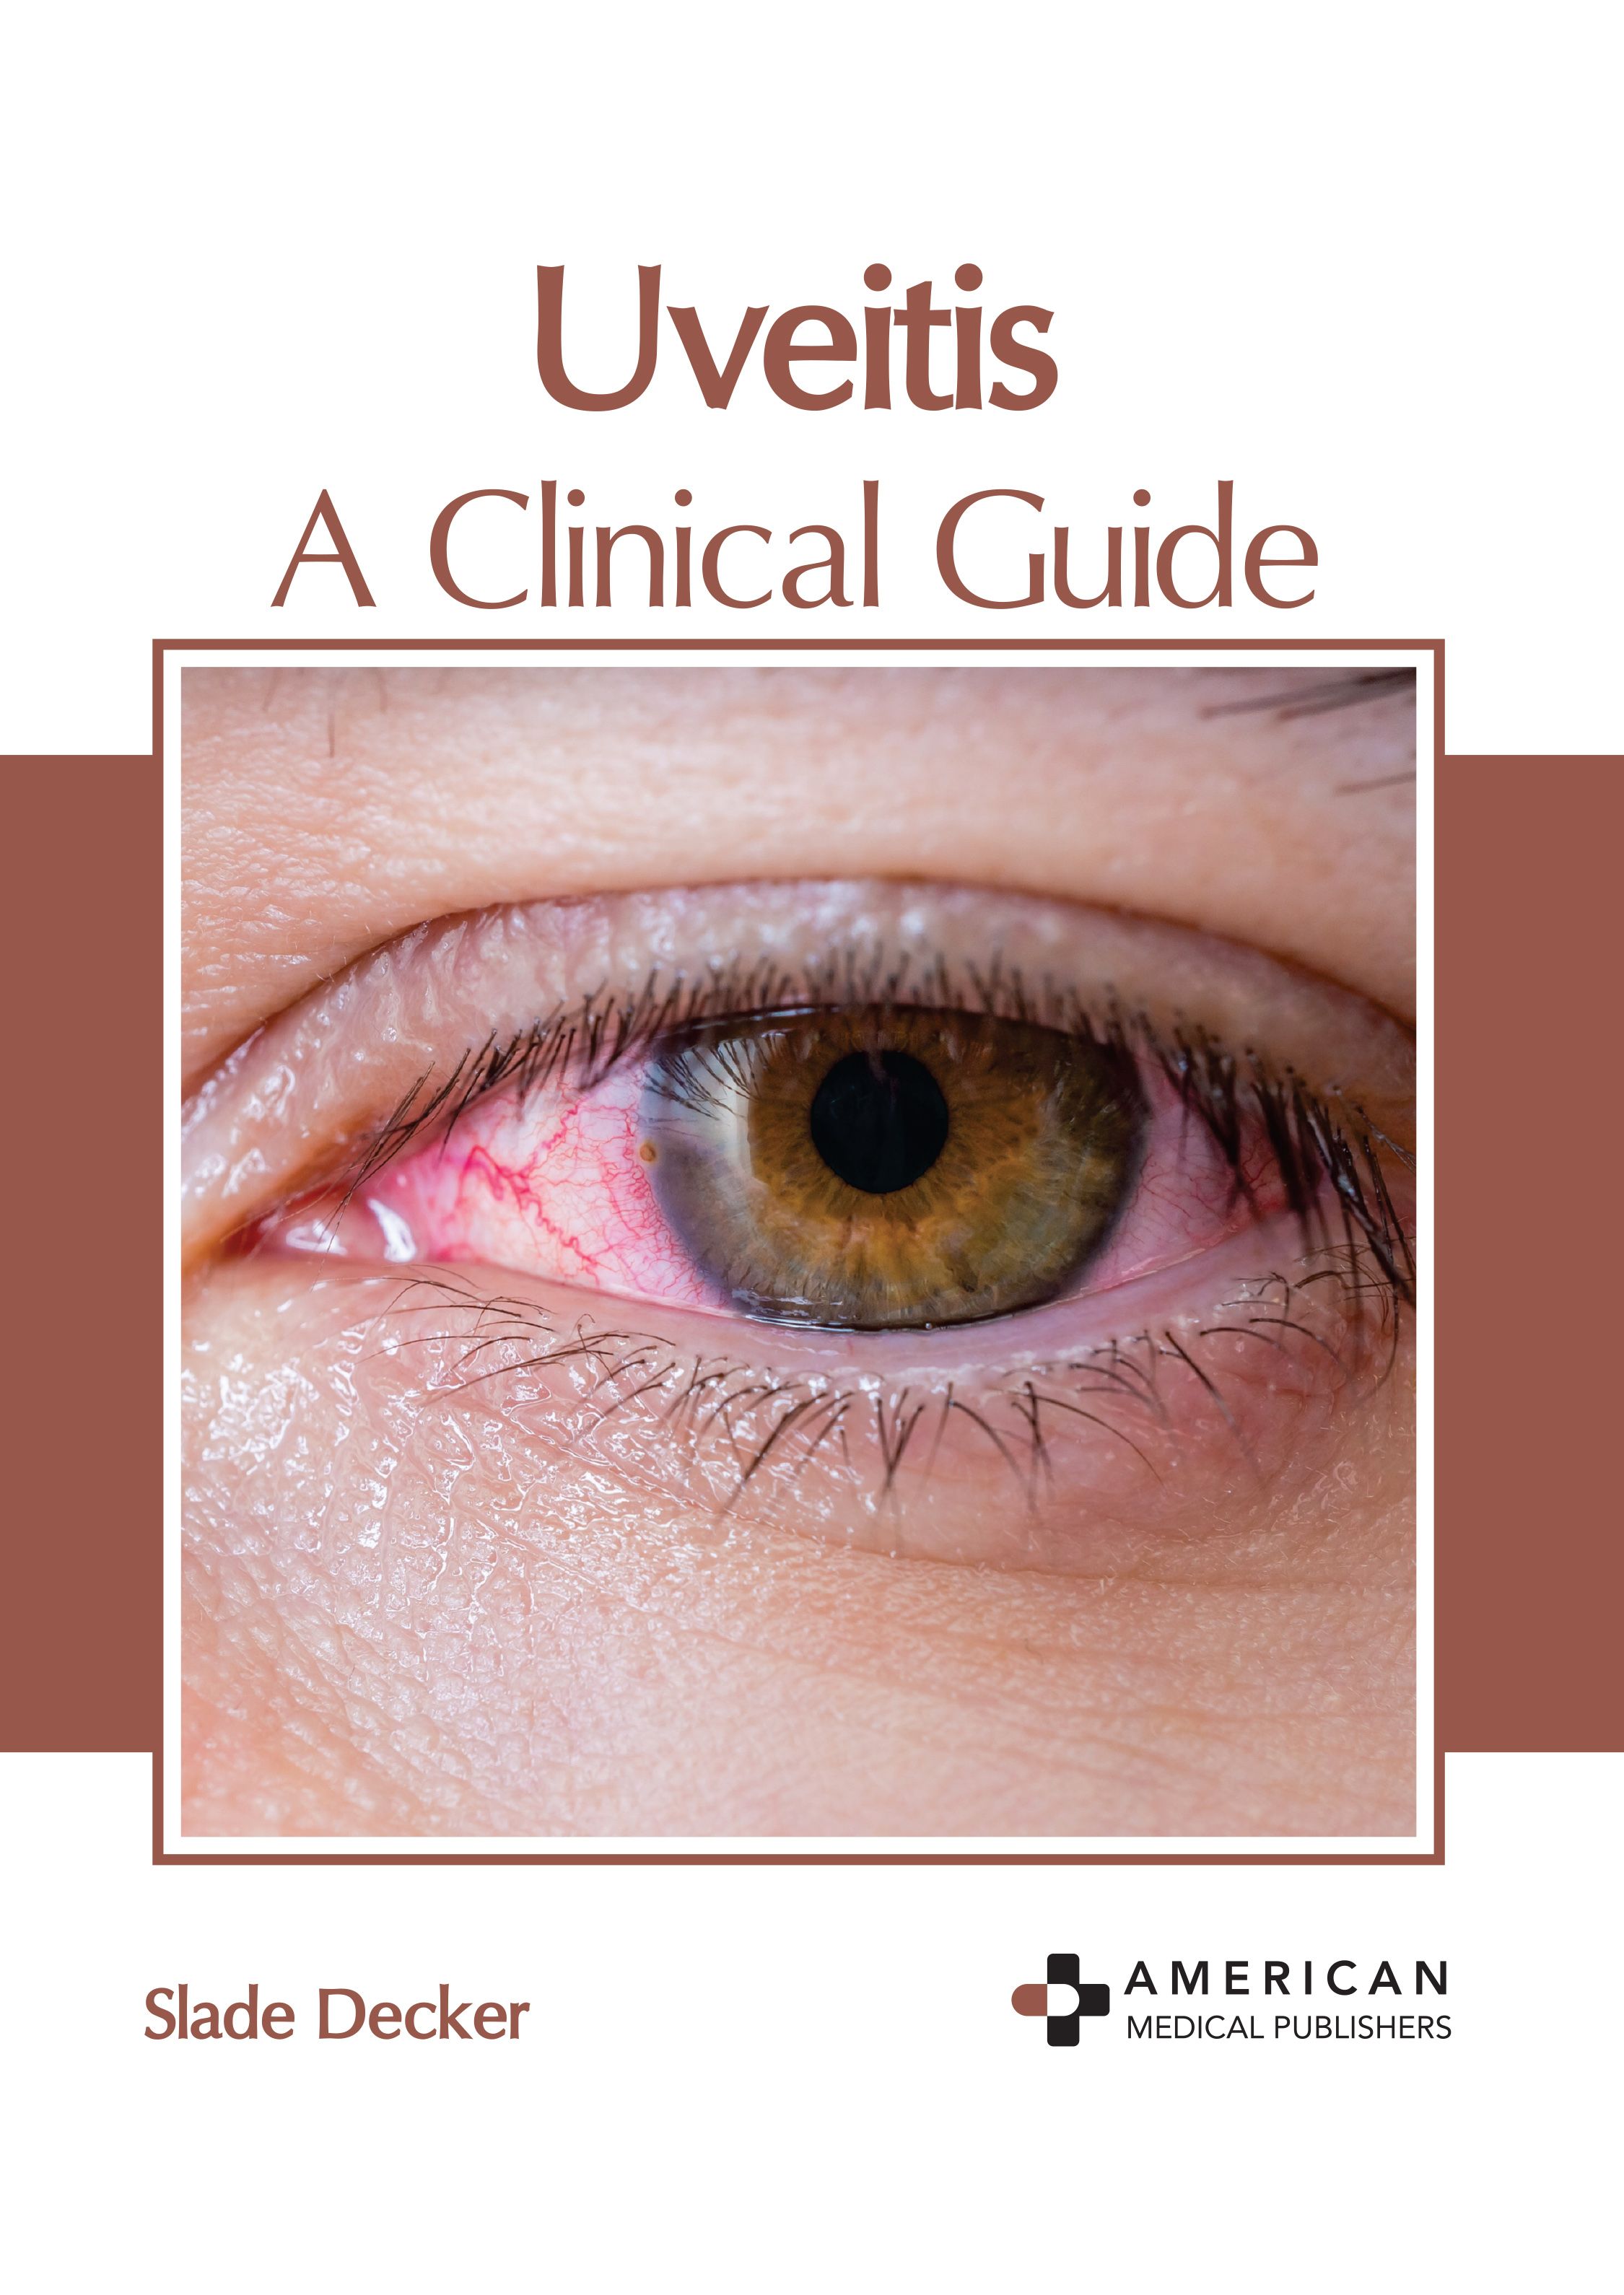 exclusive-publishers/american-medical-publishers/uveitis-a-clinical-guide-9798887405506